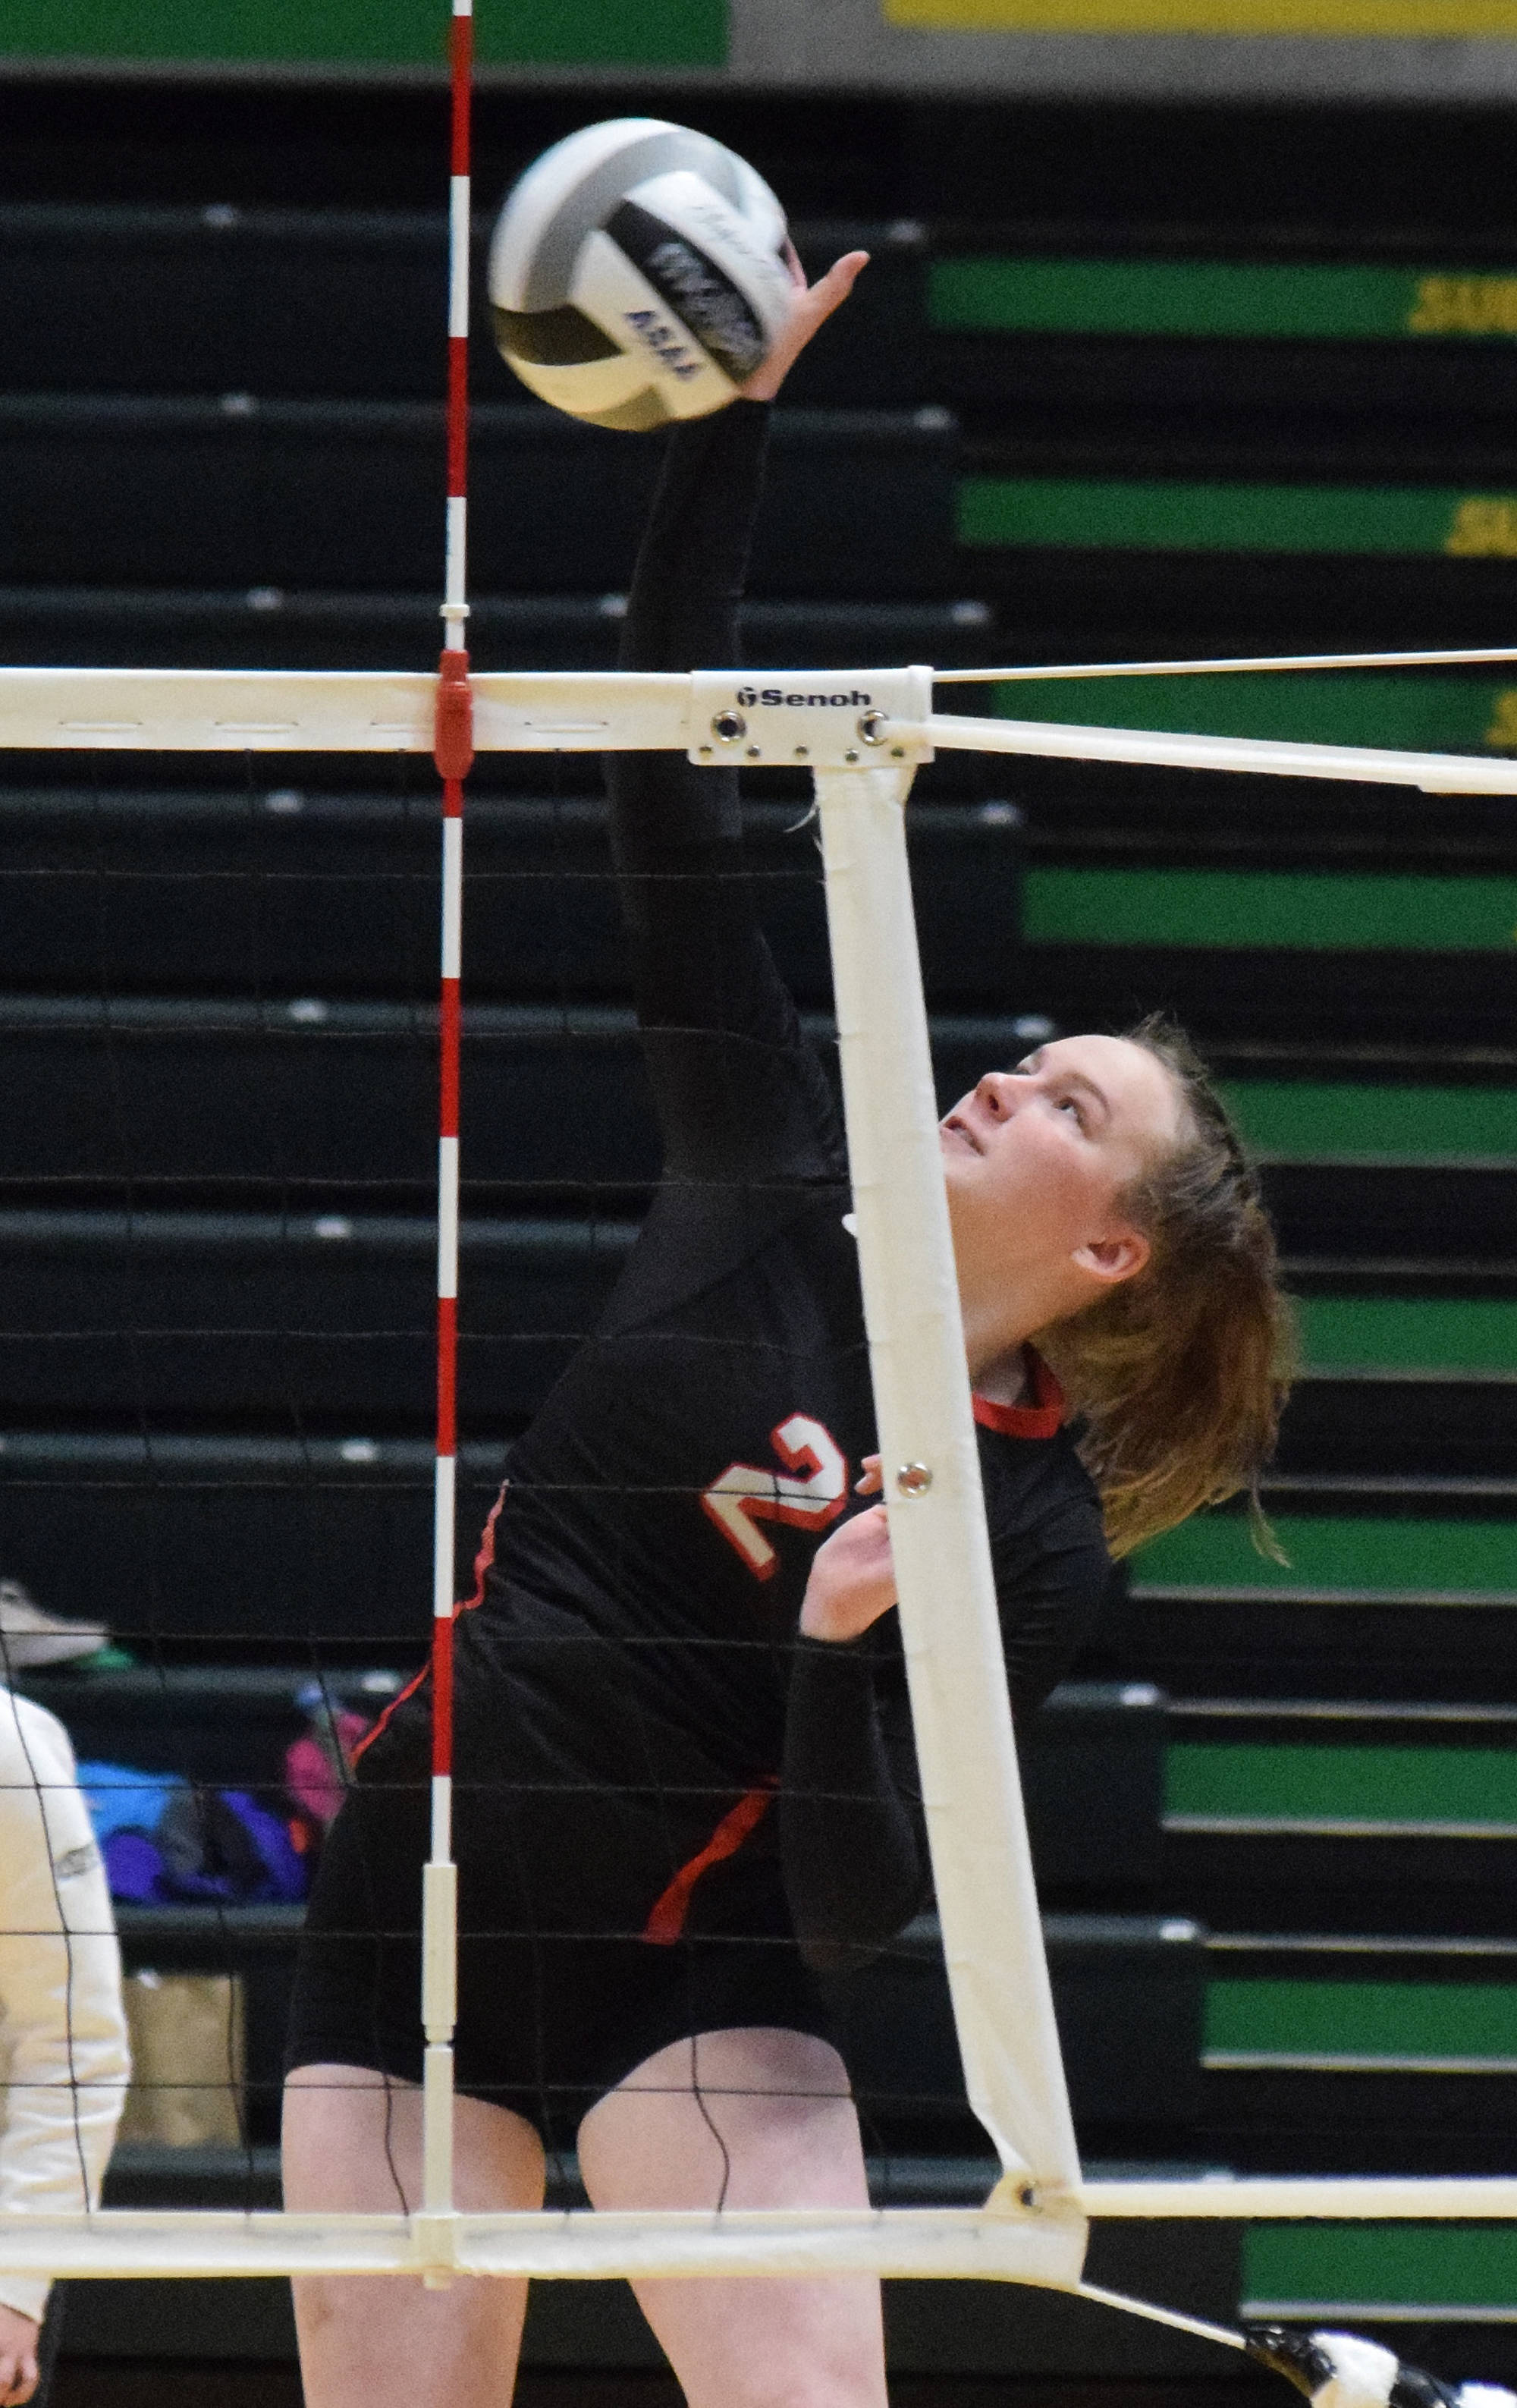 Kenai’s Bethany Morris puts up a shot Saturday, Nov. 16, 2019, against Homer at the Class 3A state volleyball tournament at the Alaska Airlines Center in Anchorage, Alaska. (Photo by Joey Klecka/Peninsula Clarion)